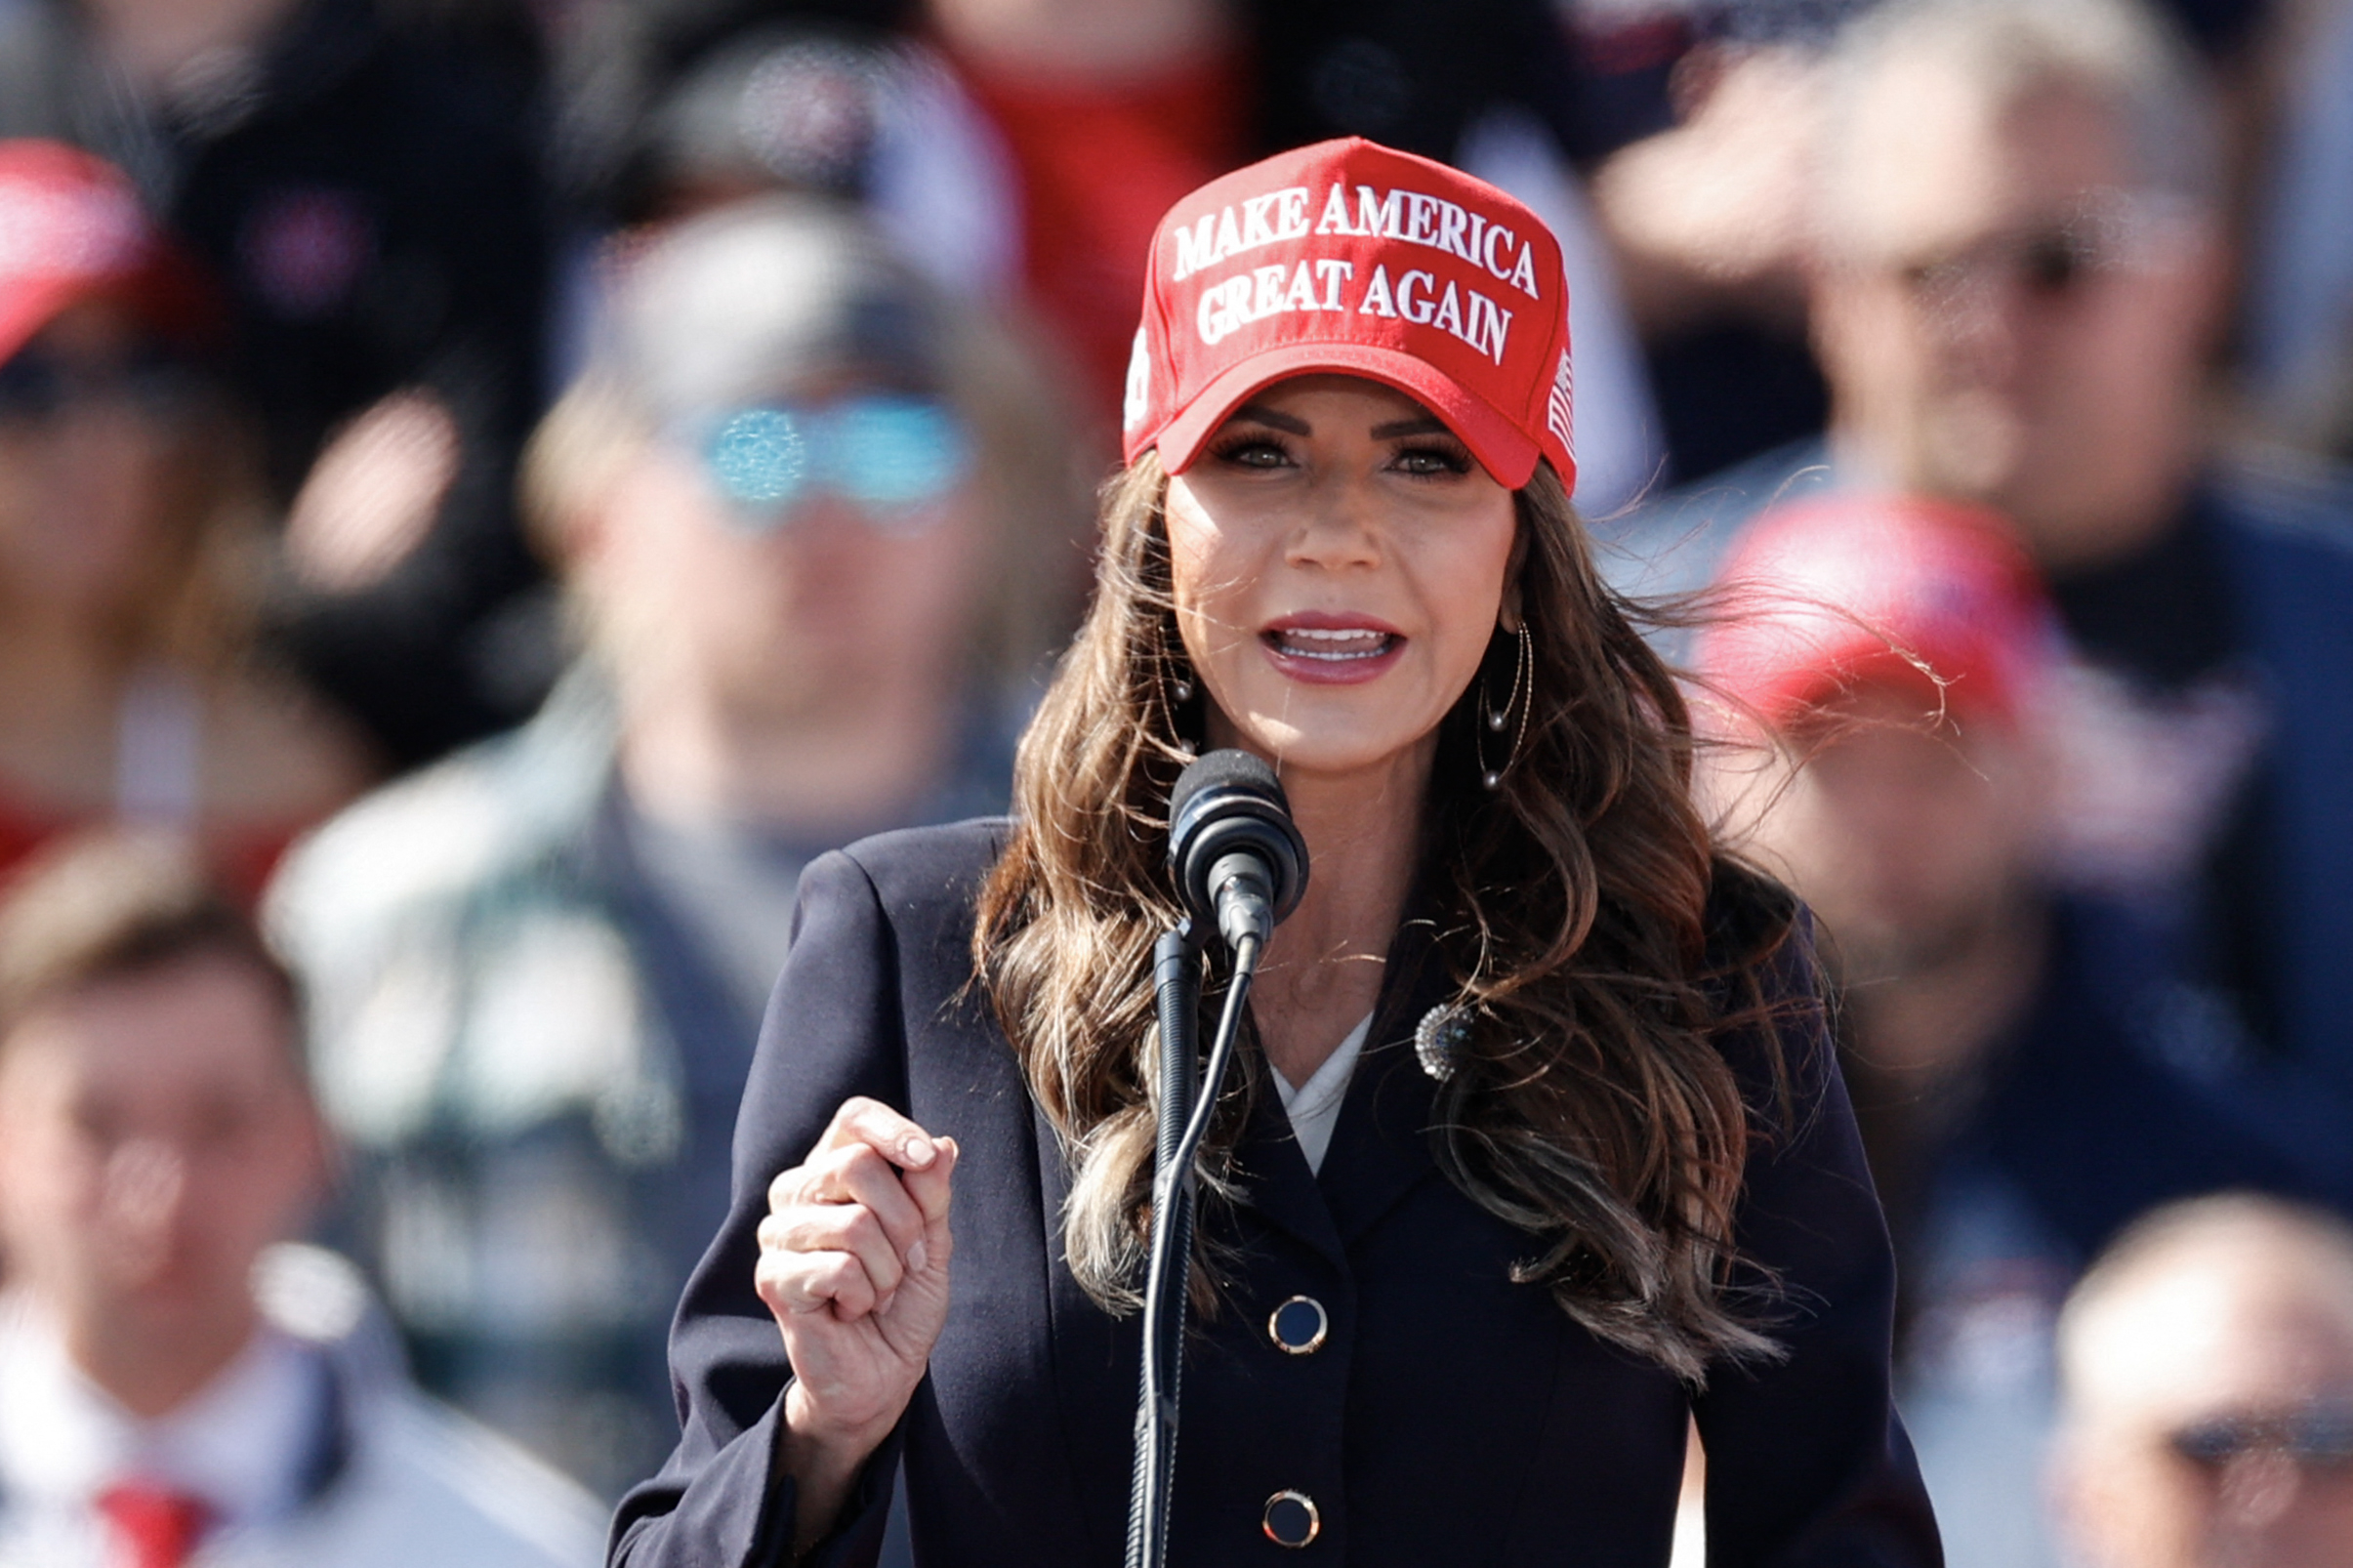 Woman speaking at a podium wearing a &quot;Make America Great Again&quot; hat